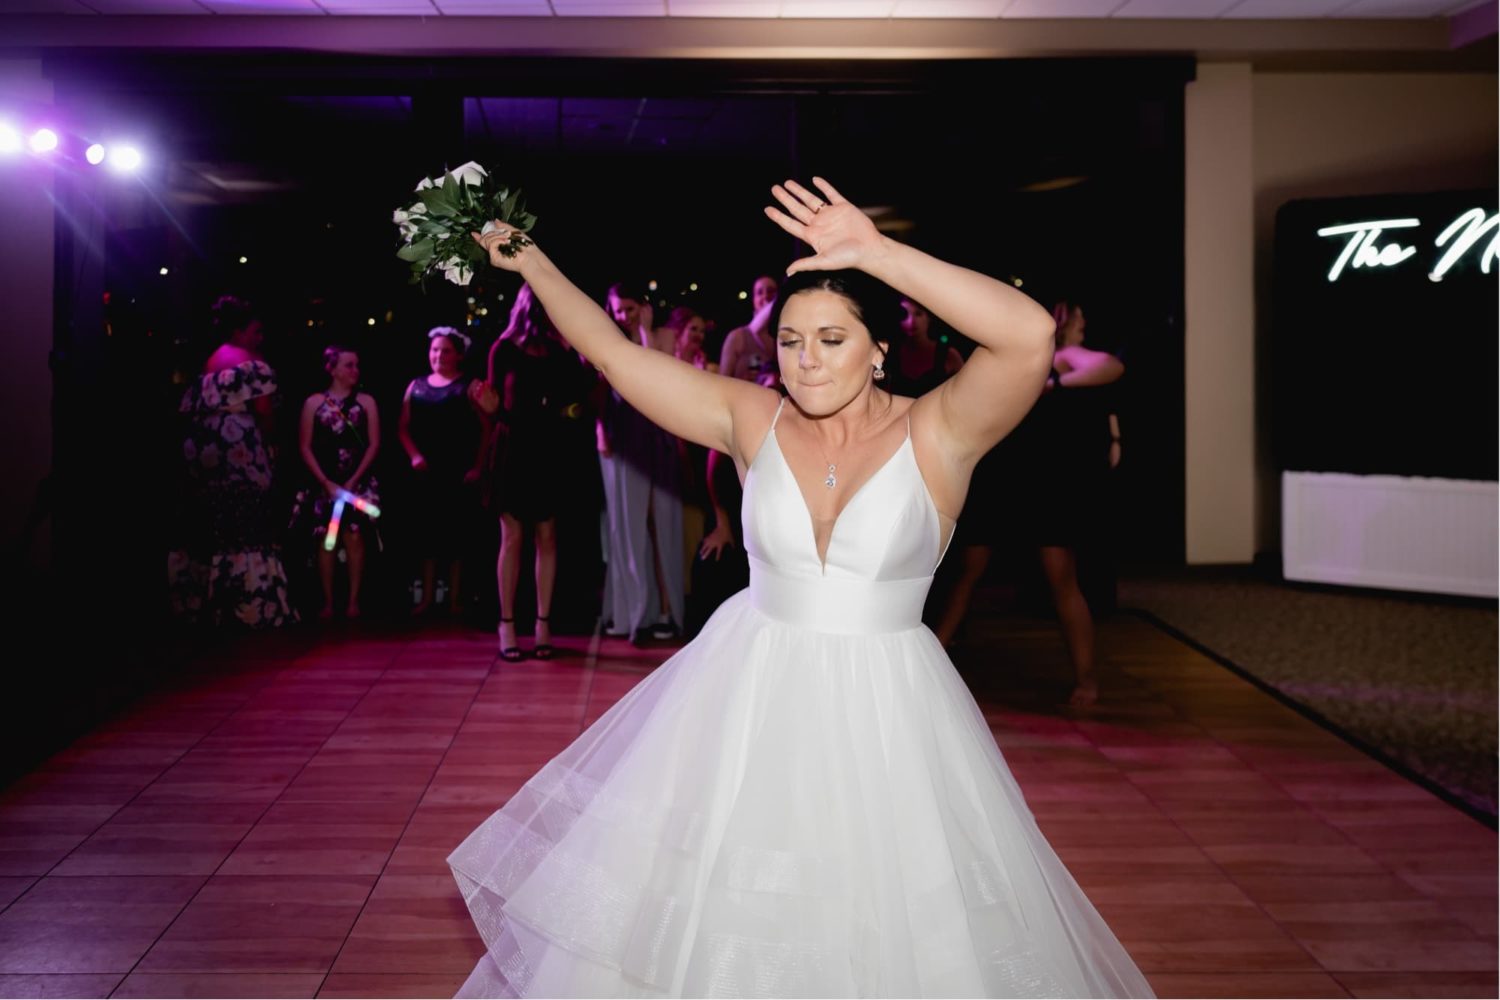 Bride getting ready to toss her bouquet on the dance floor